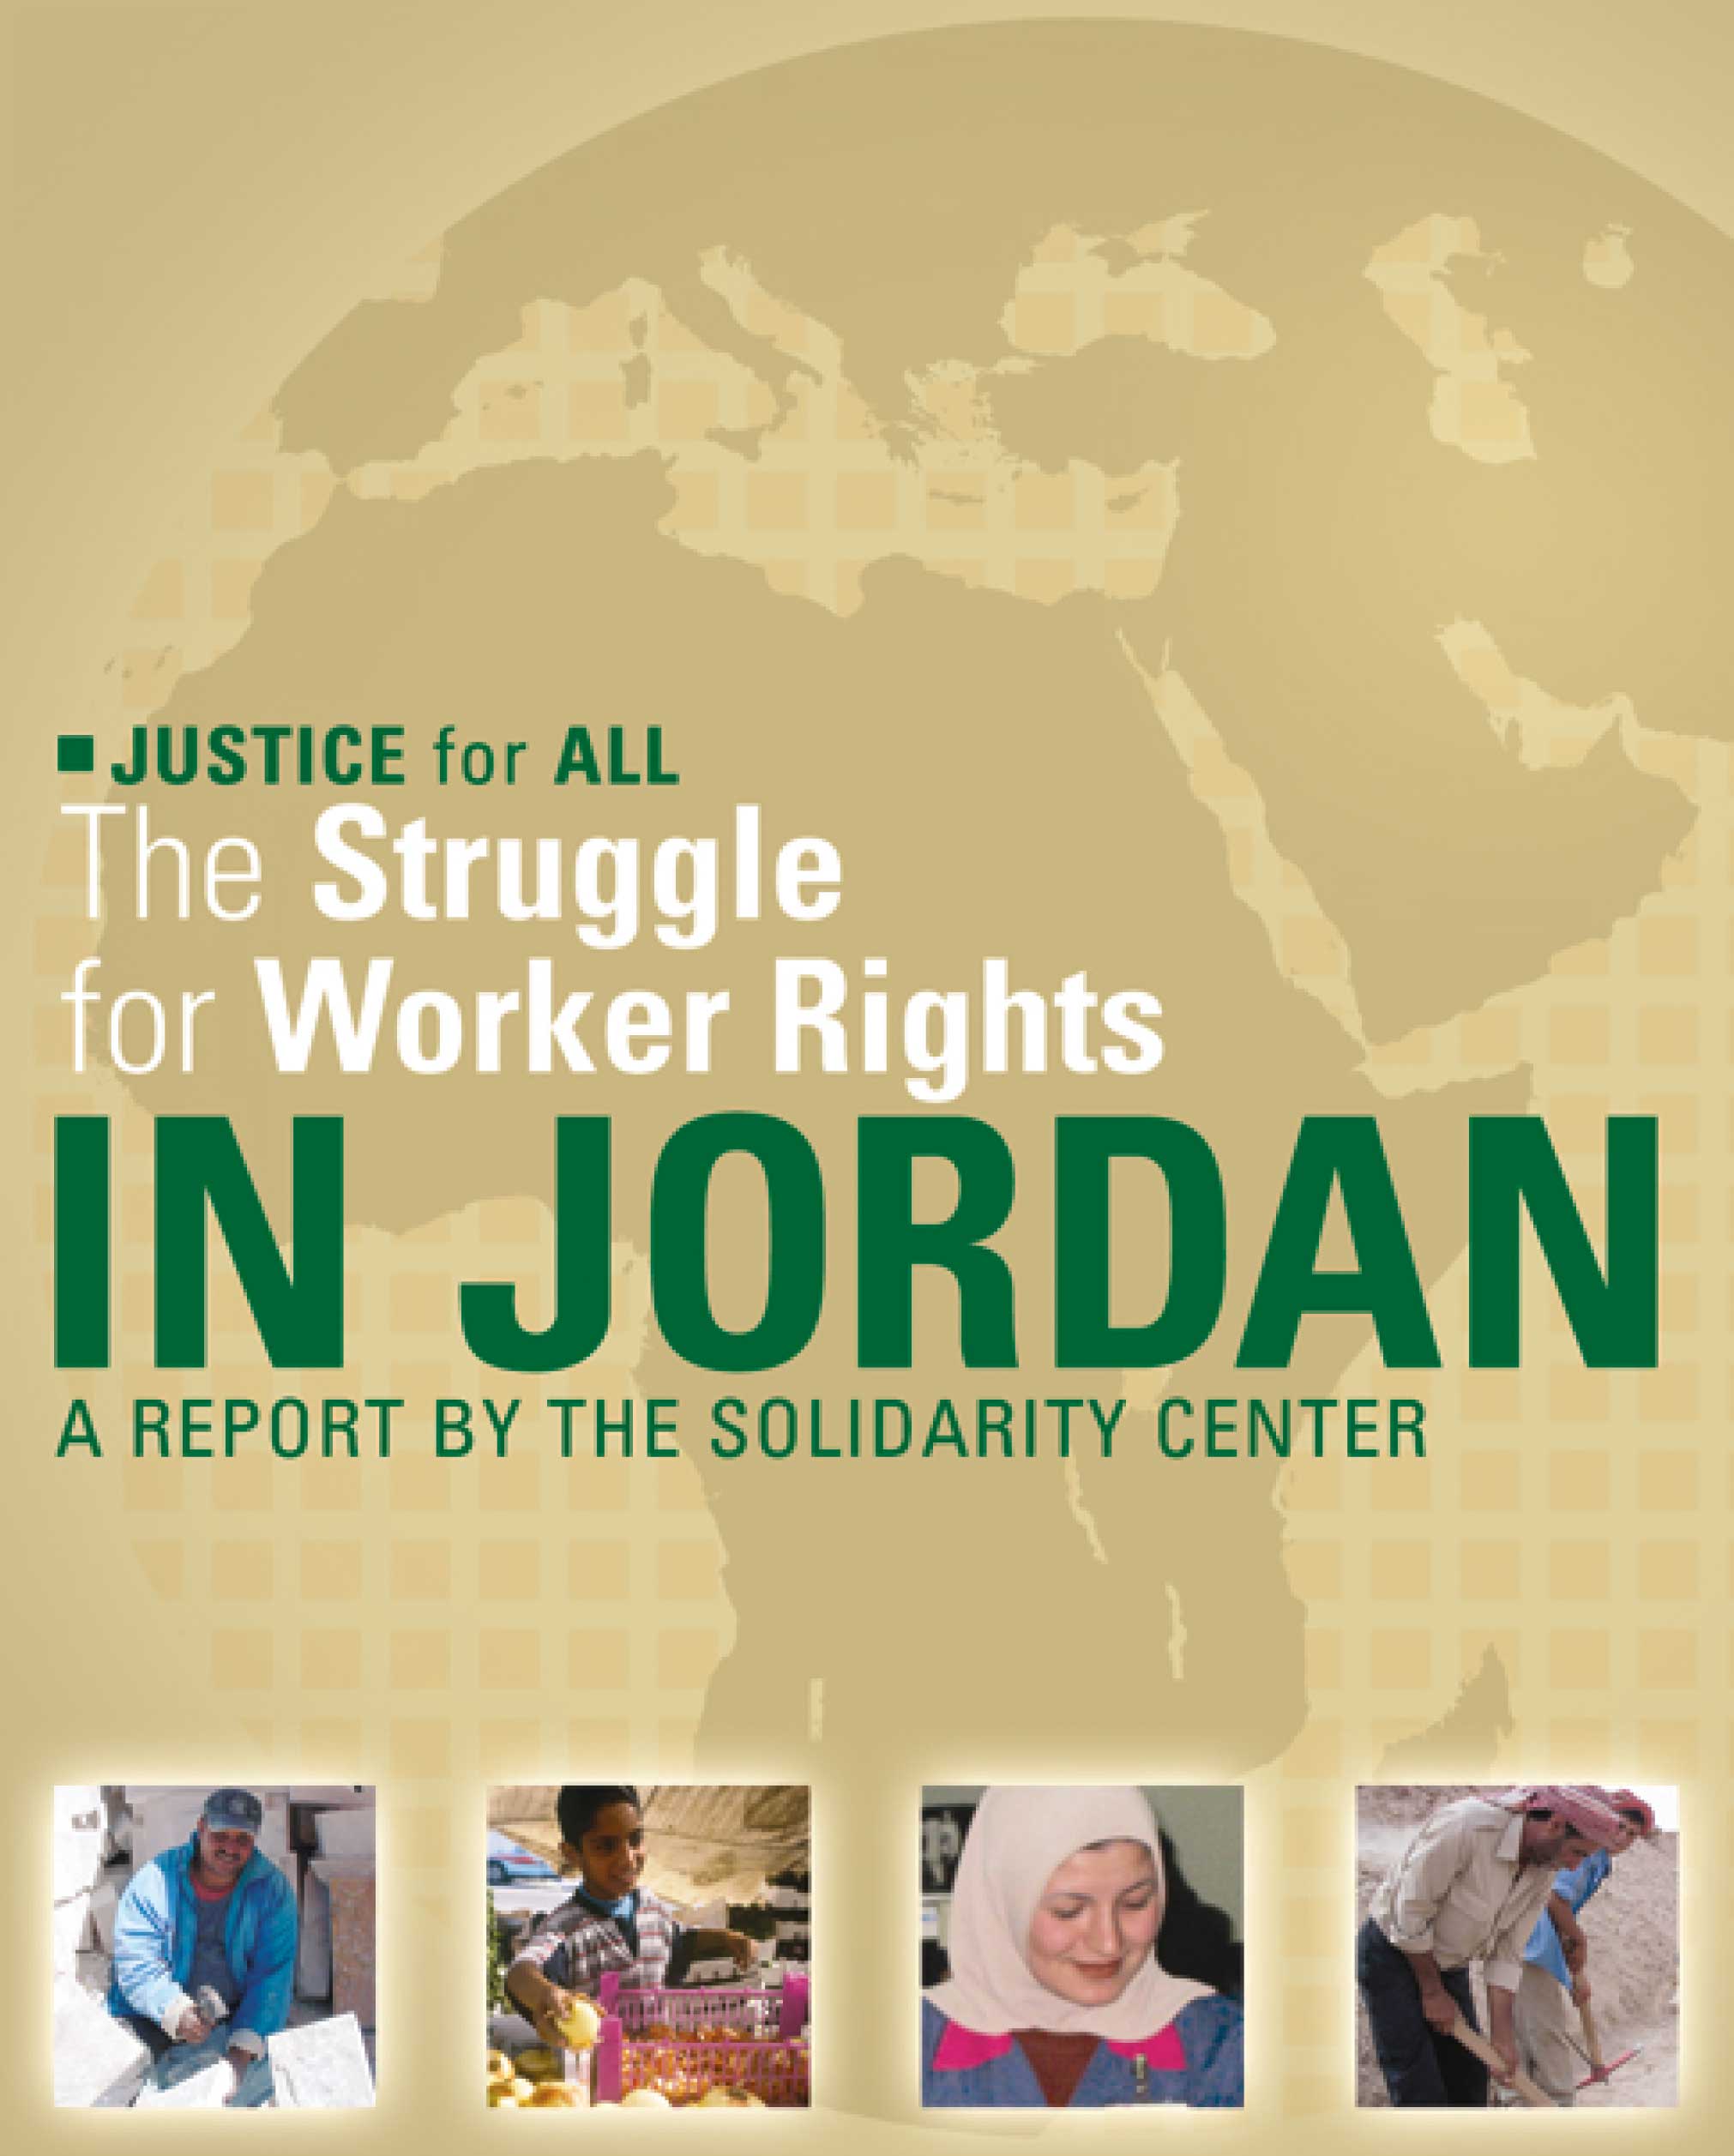 The struggle for worker's rights in Jordan report poster